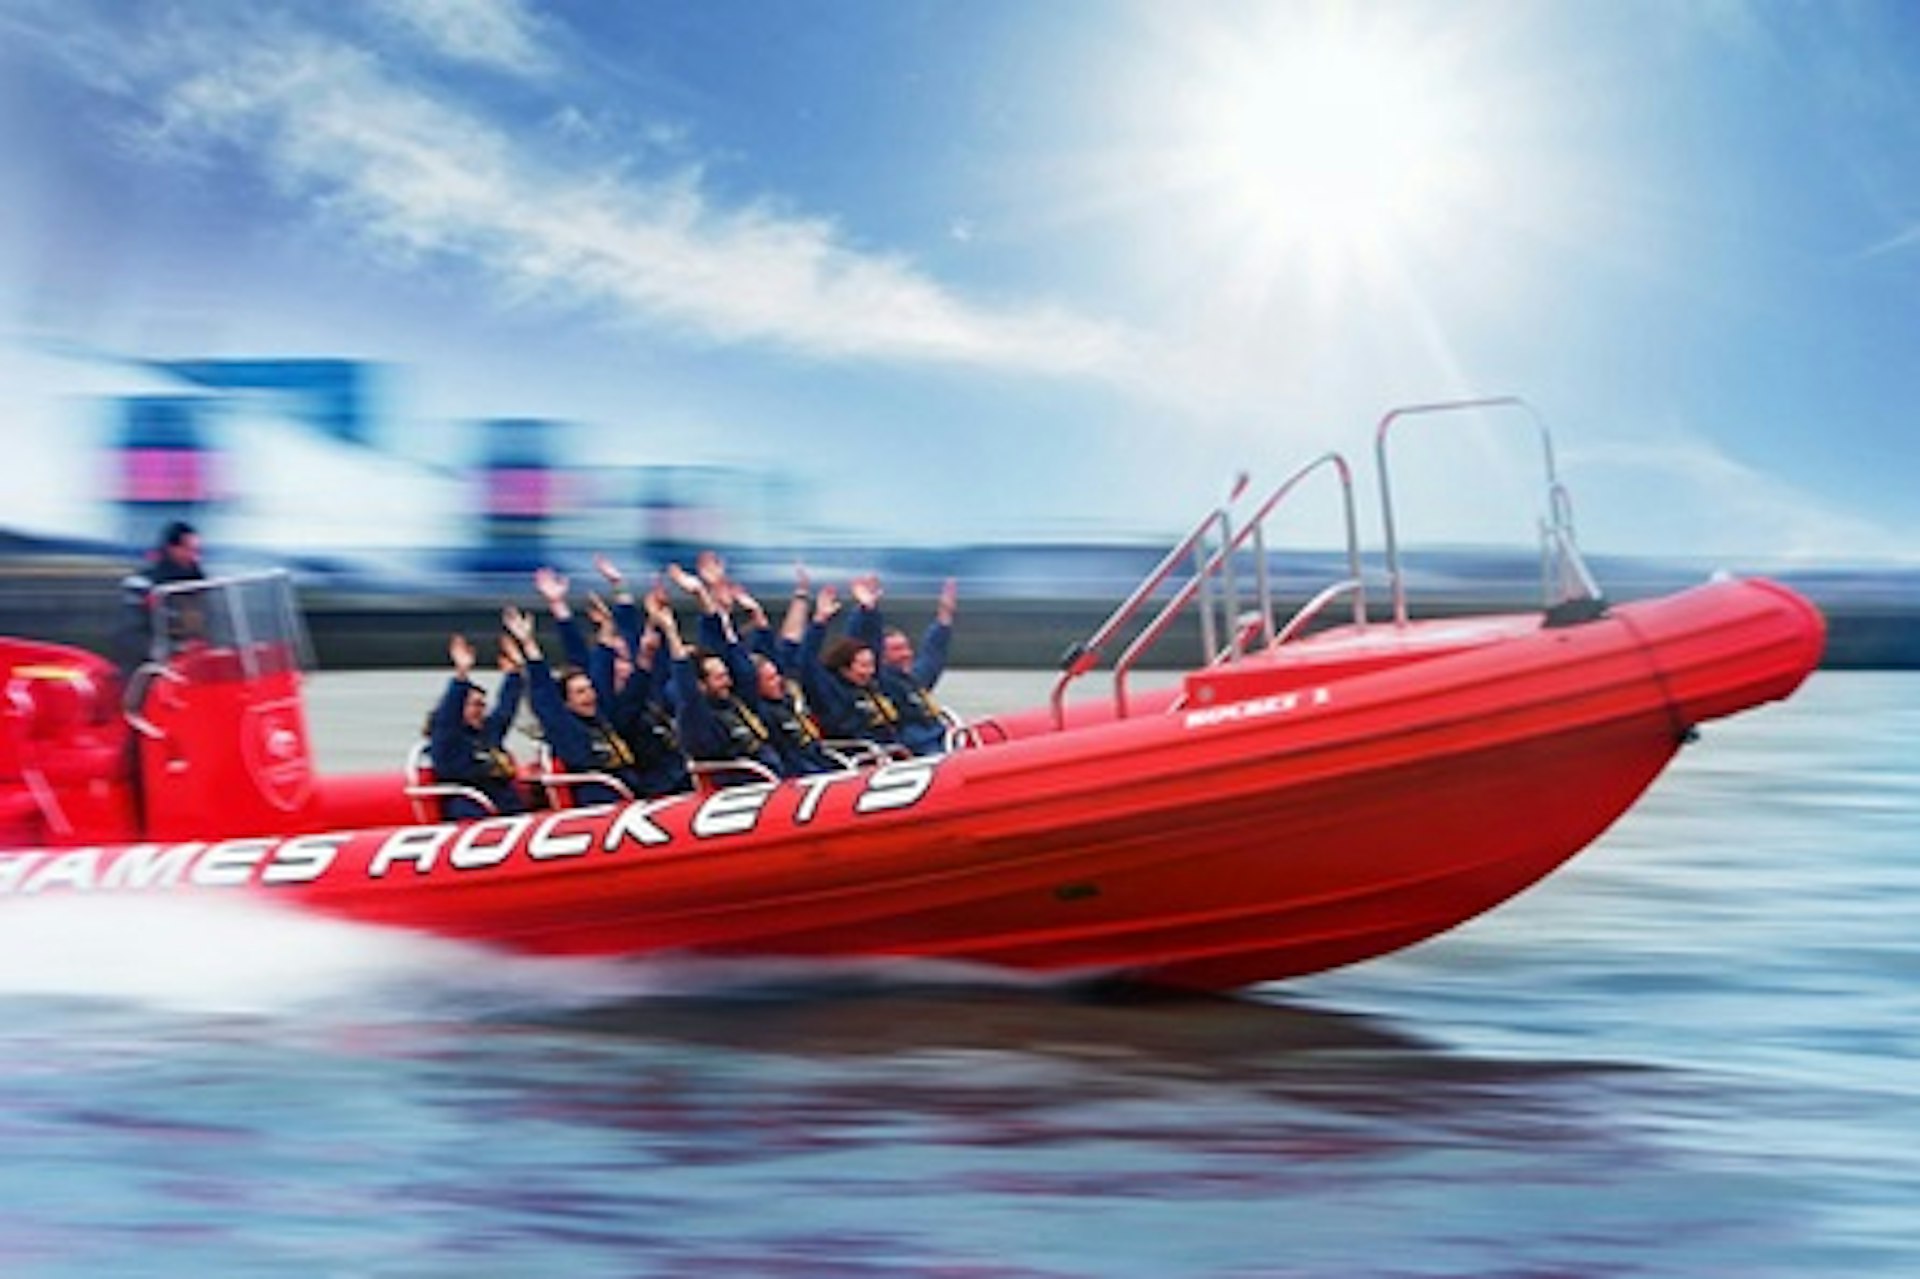 Thames Rockets Speed Boat Ride and Three Course Meal with Wine at Brasserie Blanc for Two